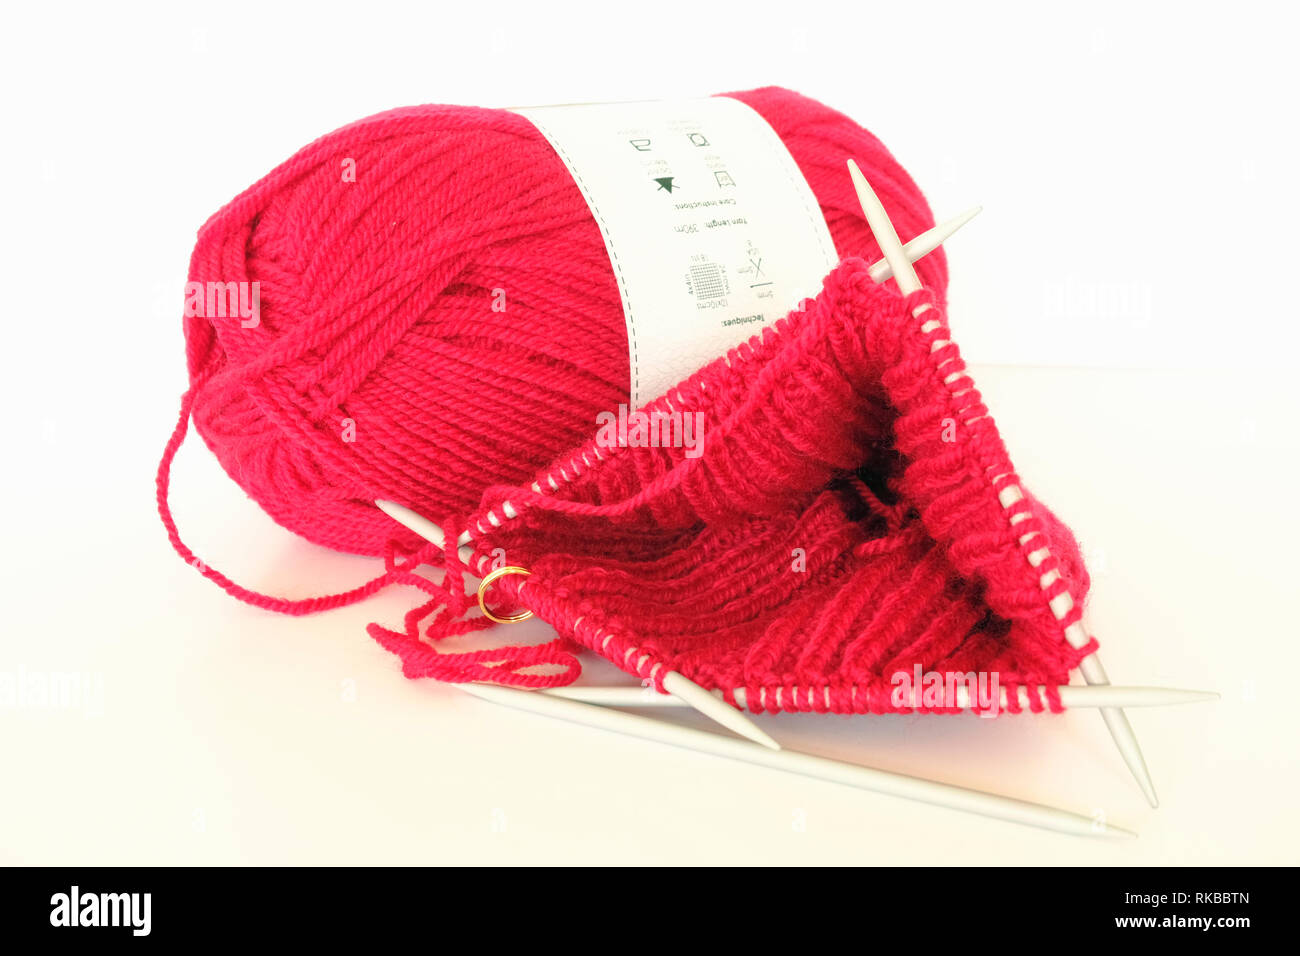 Red woollen hat being knitted on four needles on white background Stock Photo